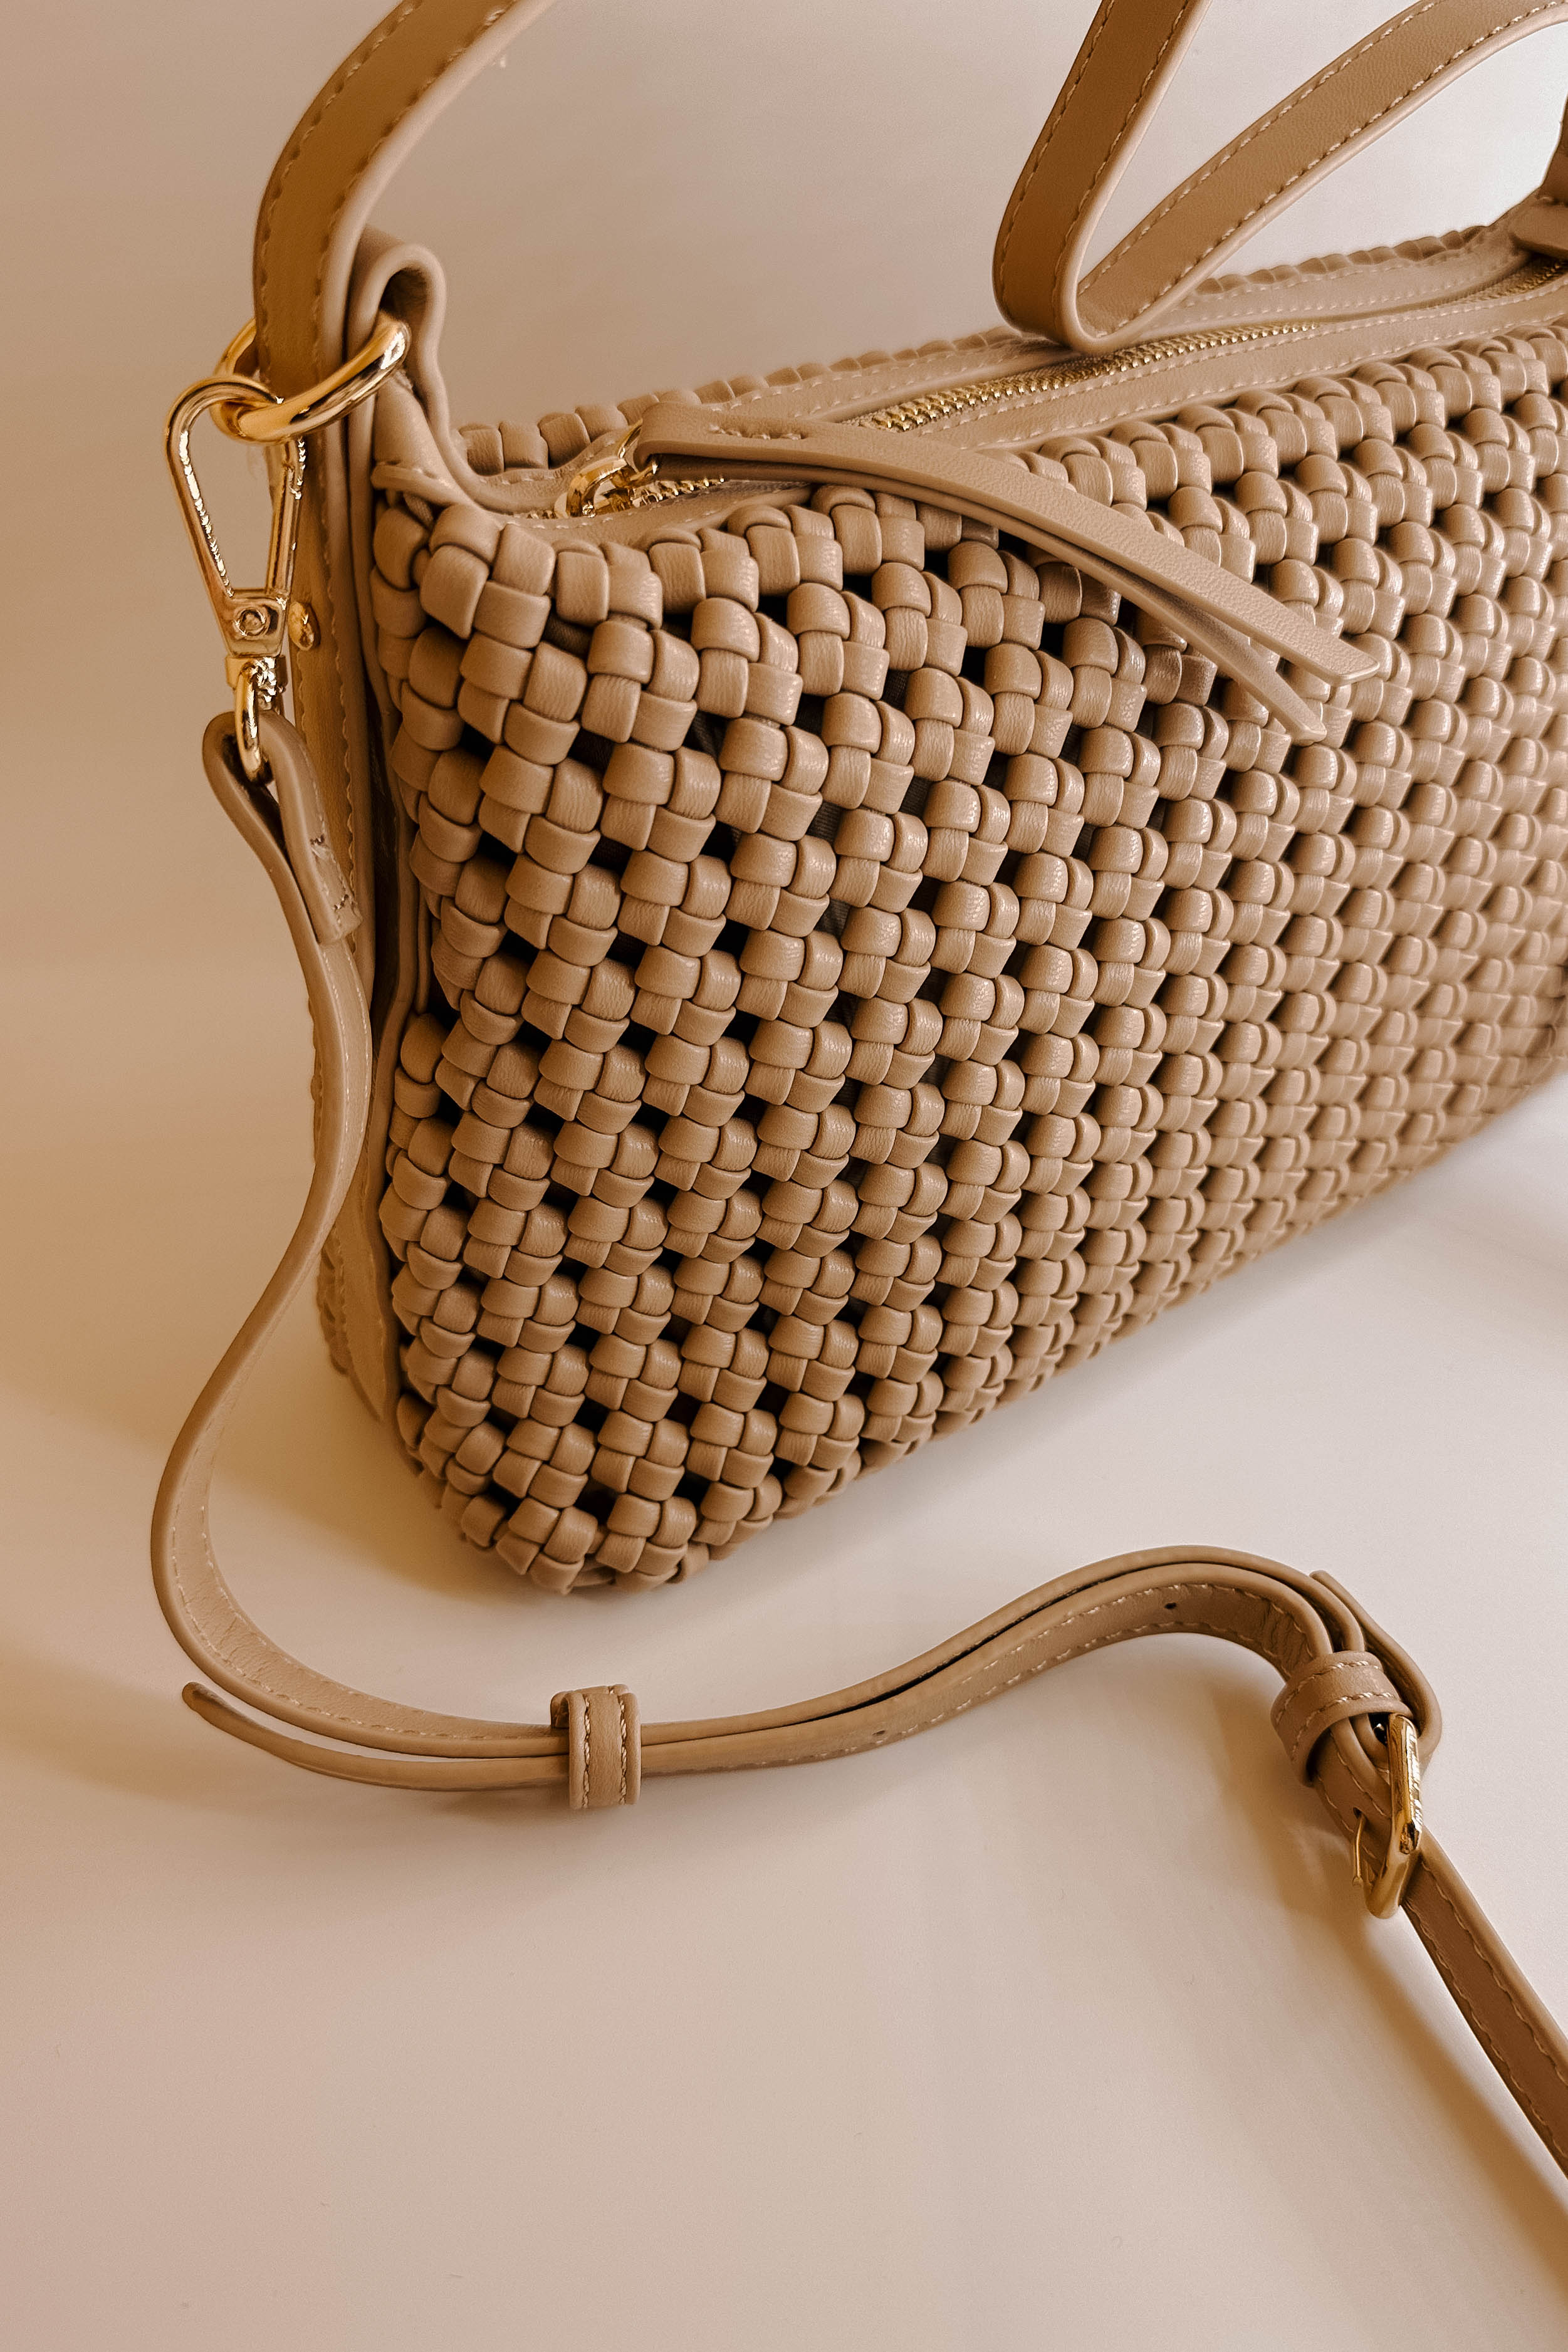 Close front view of the Naya Beige Woven Purse. It has dark beige faux-leather material with a woven design, short and long removable straps, gold hardware, and a patterned interior with a zippered pocket and a slit pocket.